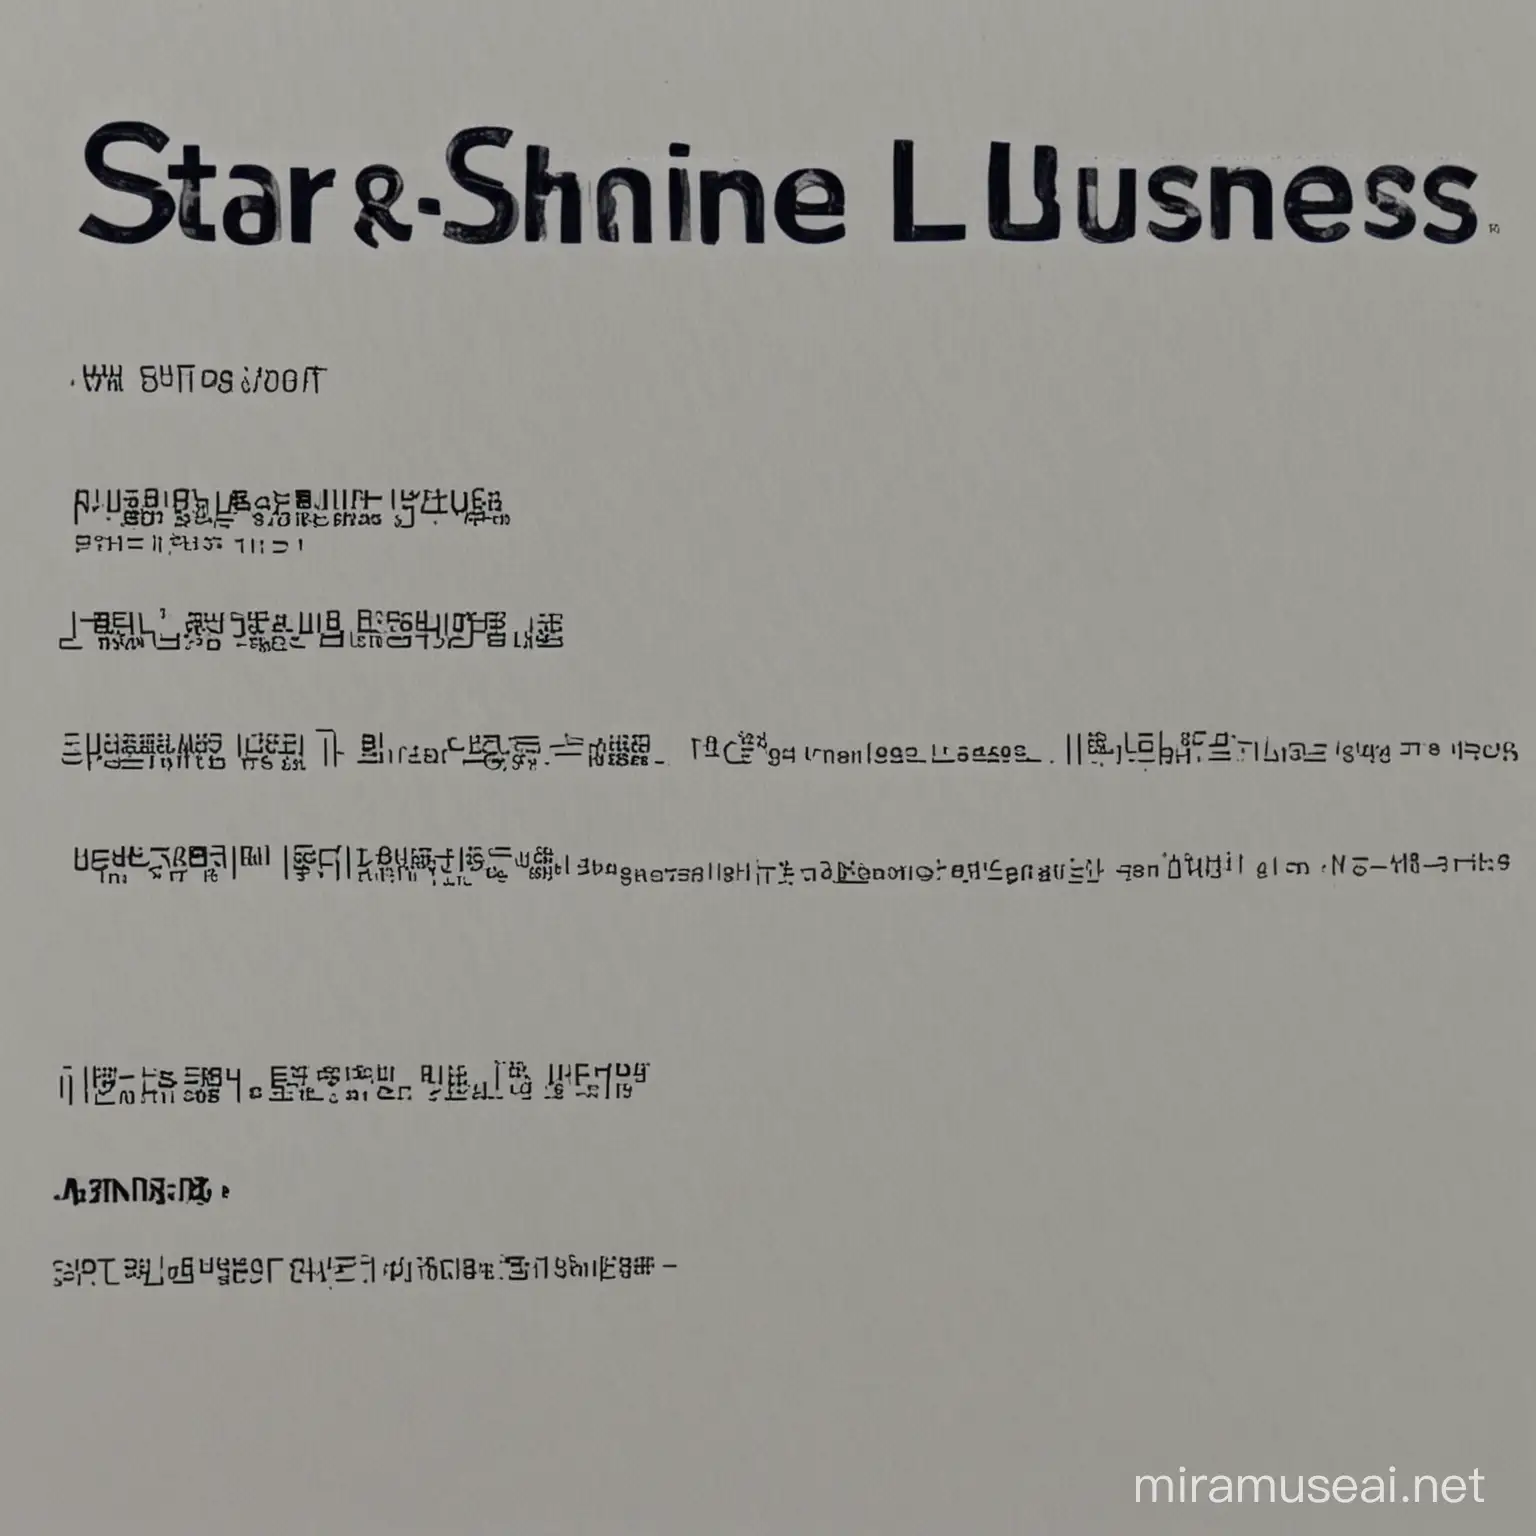 Starshine Technology Business License with SBT001 Code